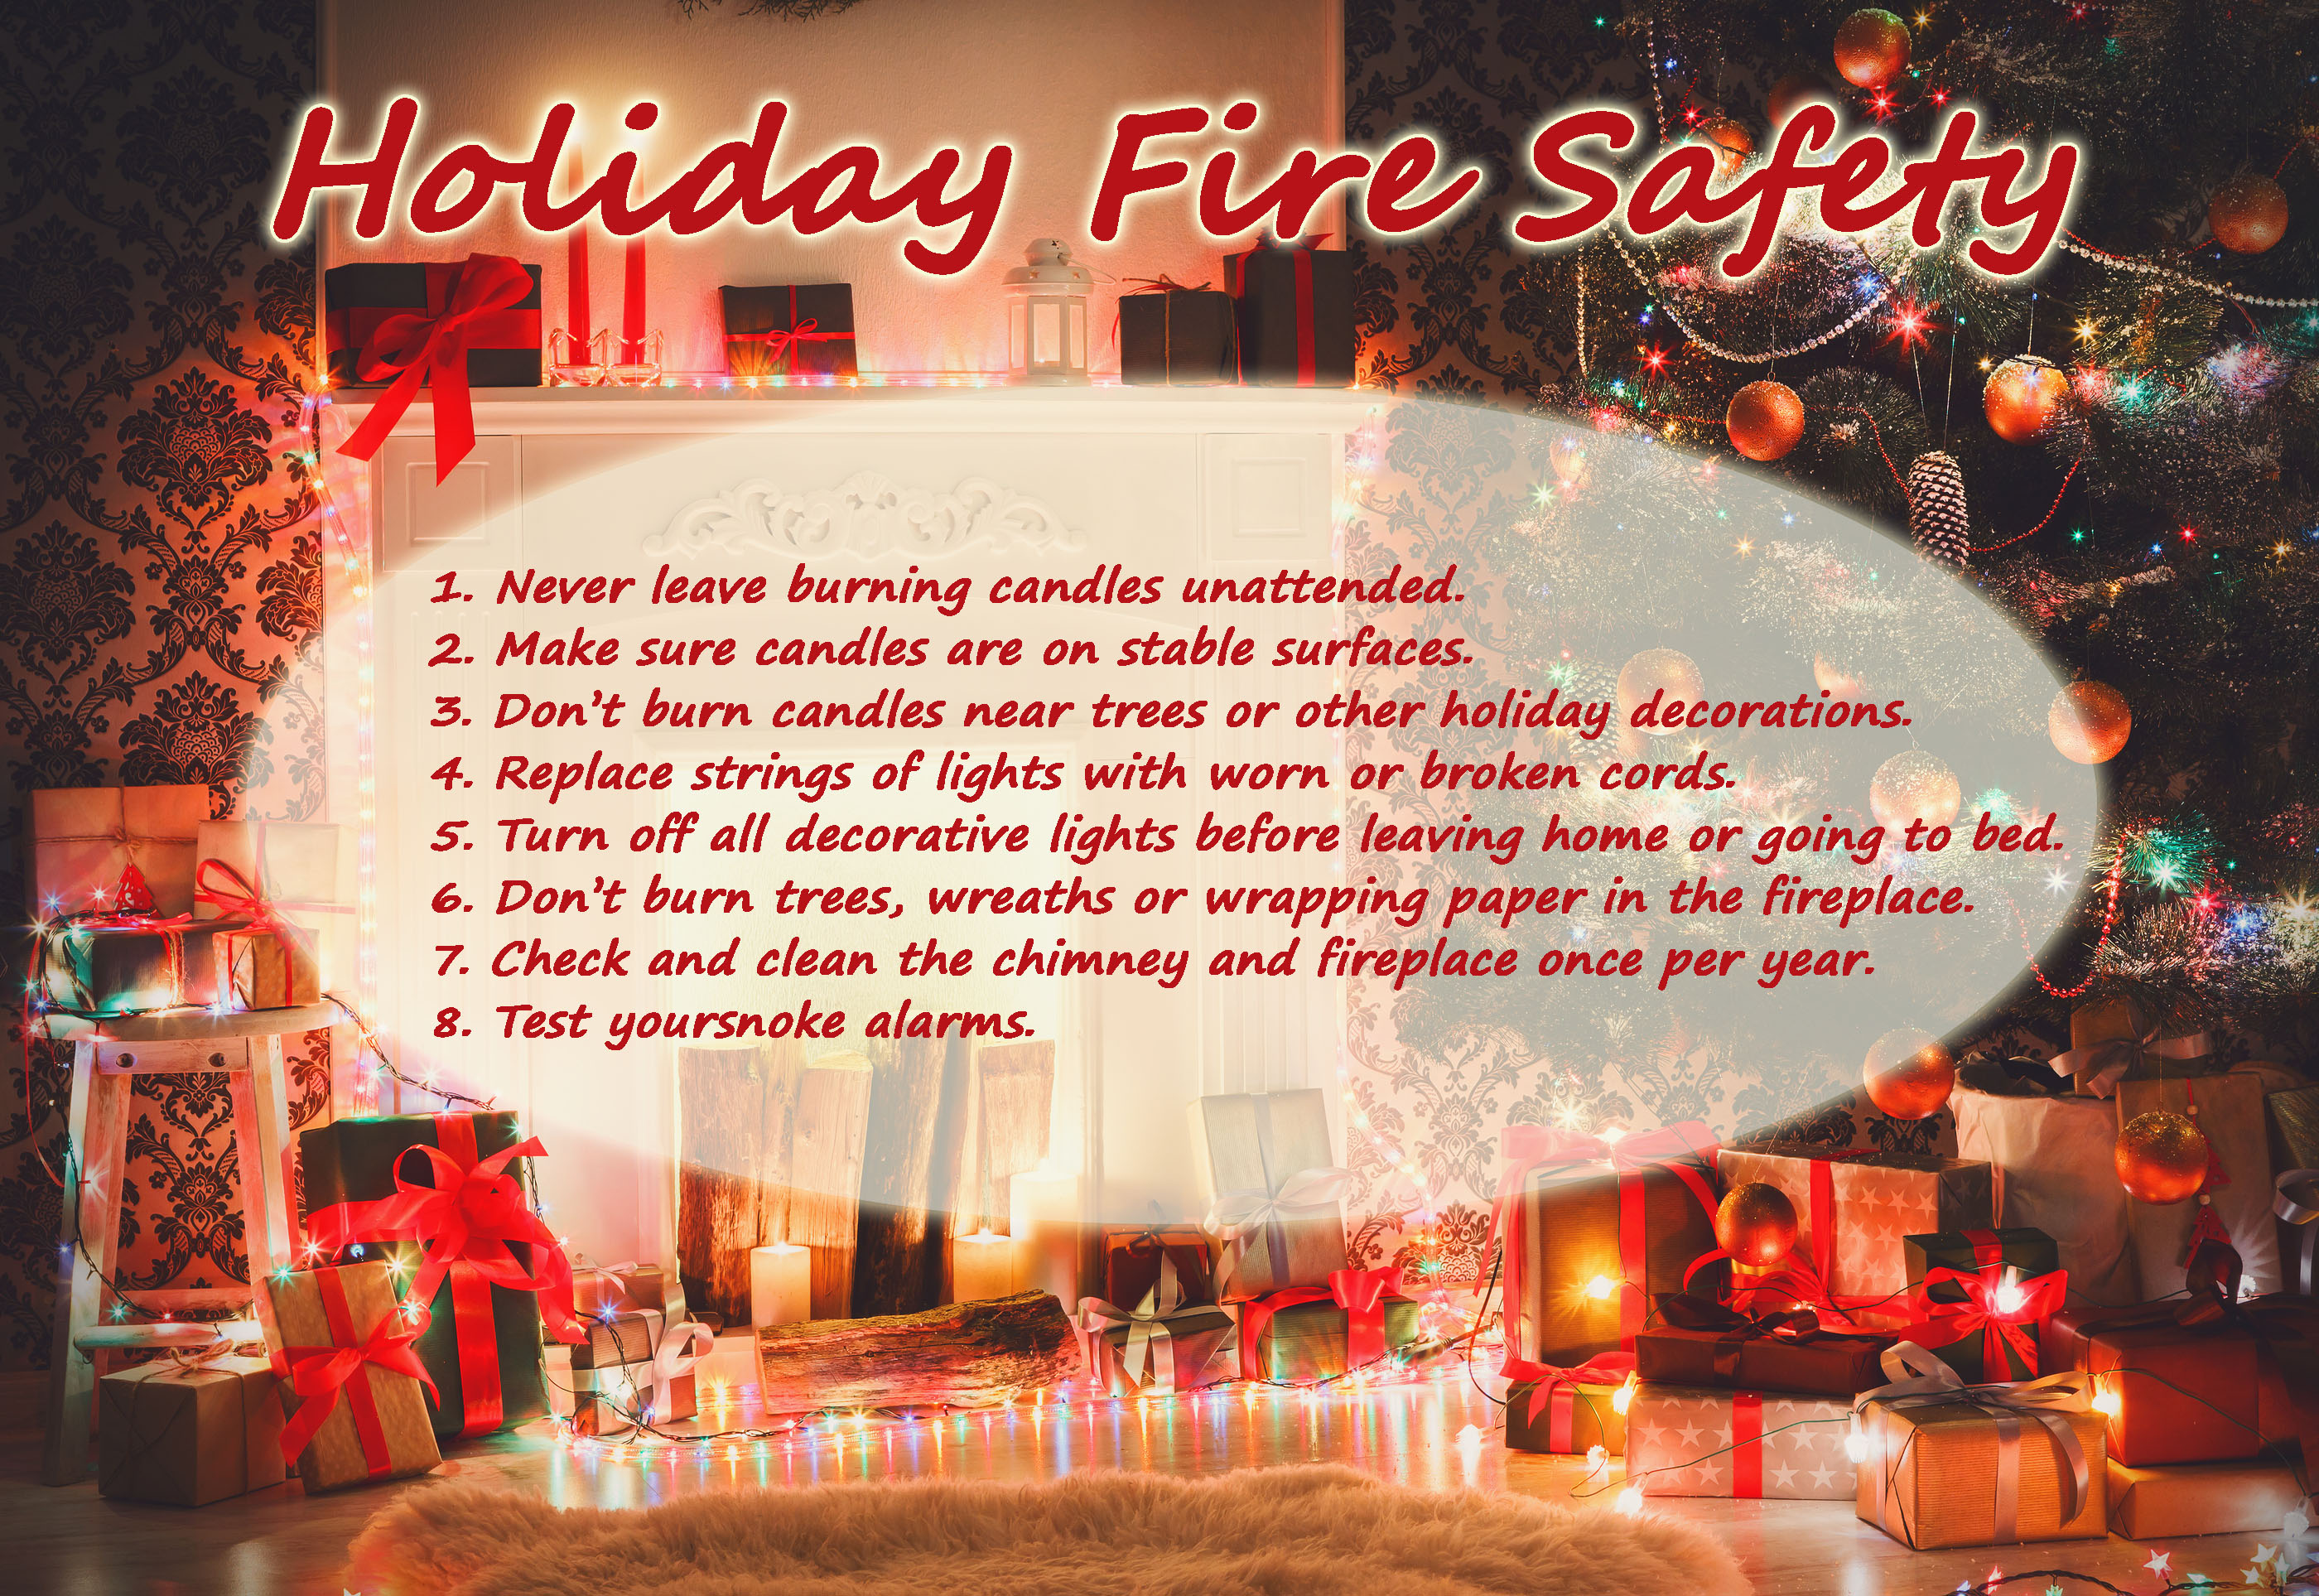 HolidayFire Safety poster